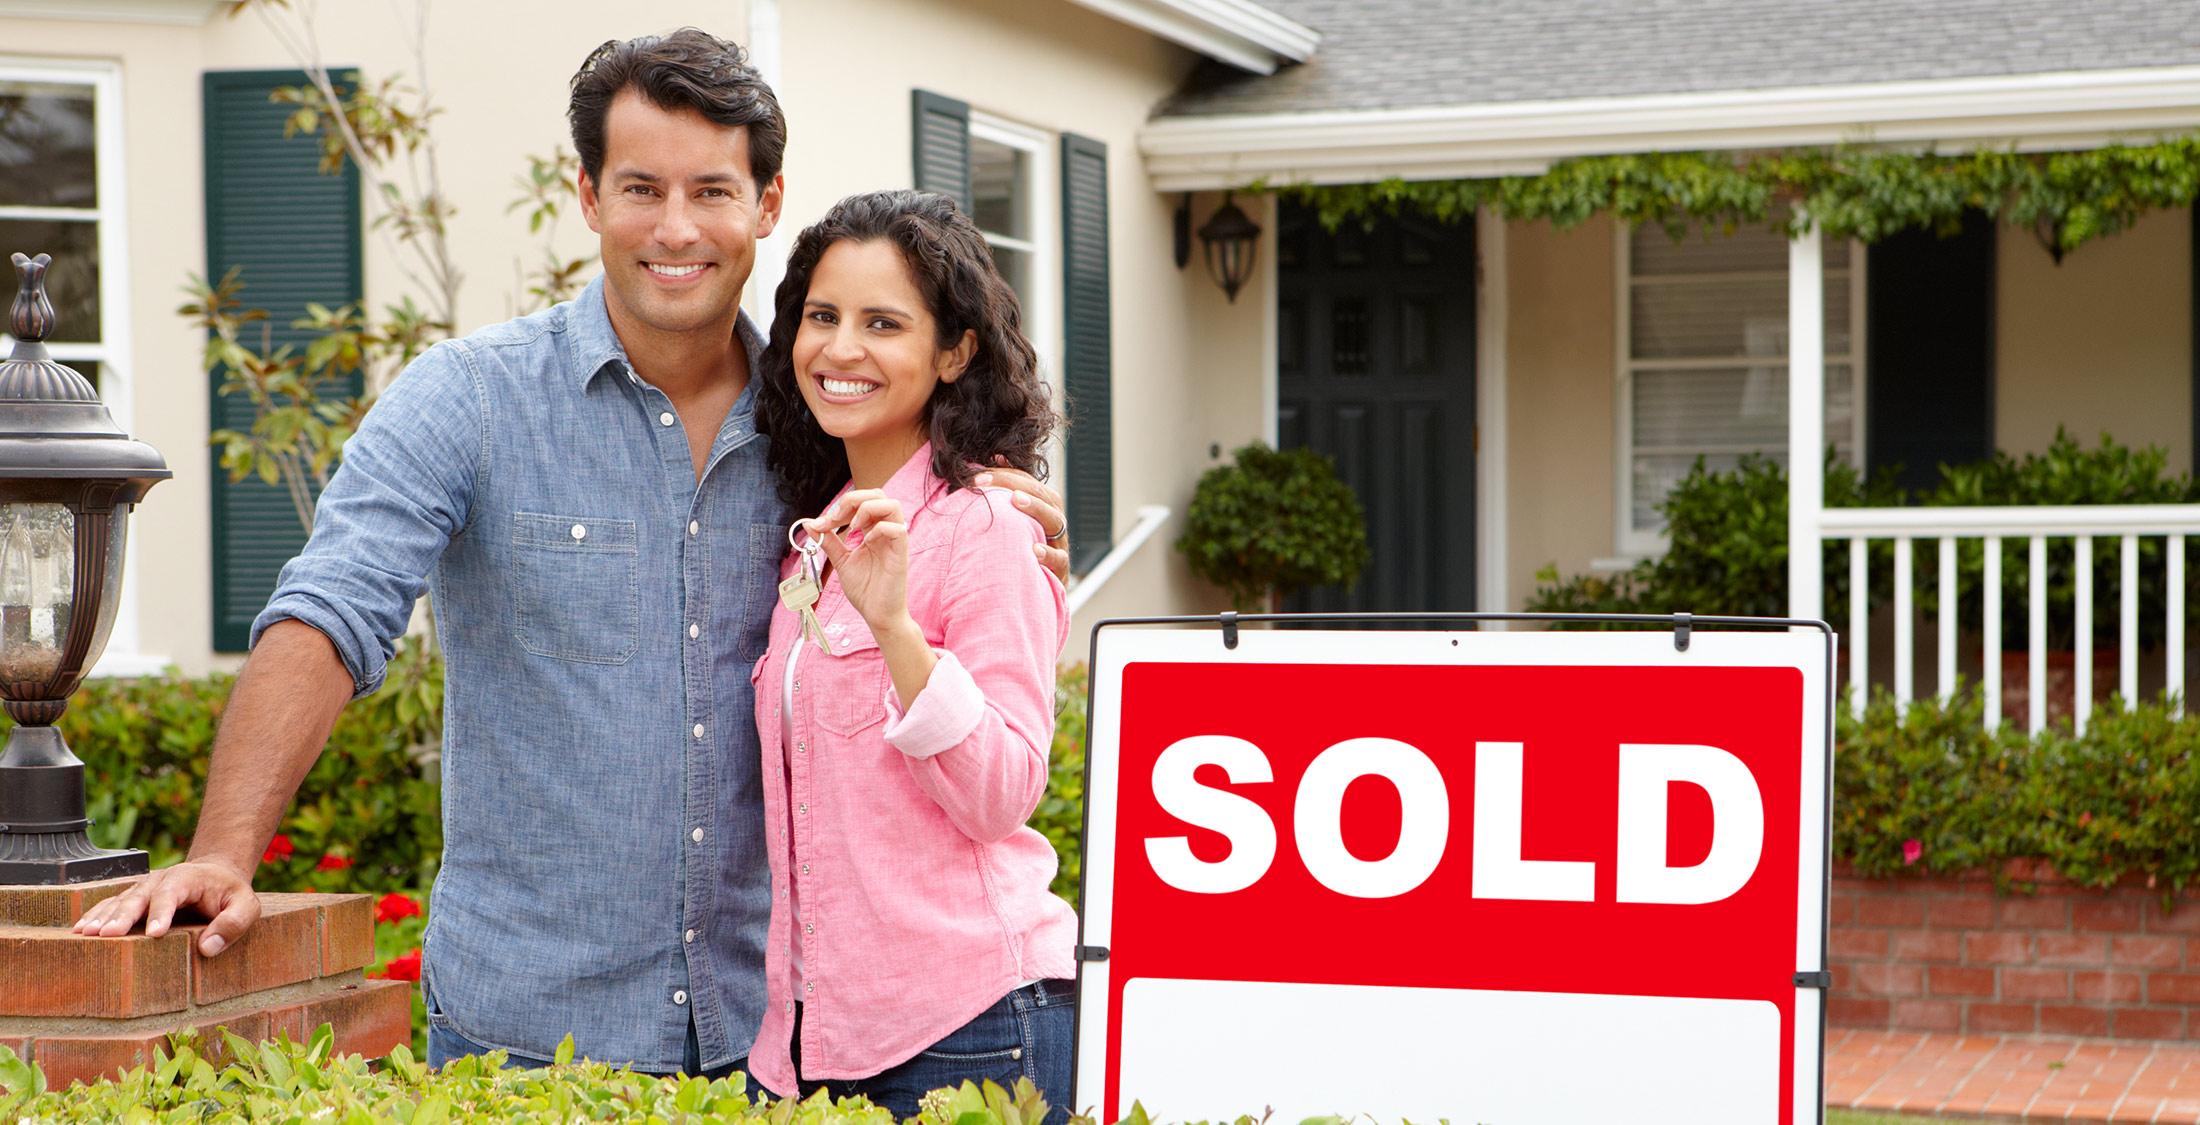 couple standing in front of sold house